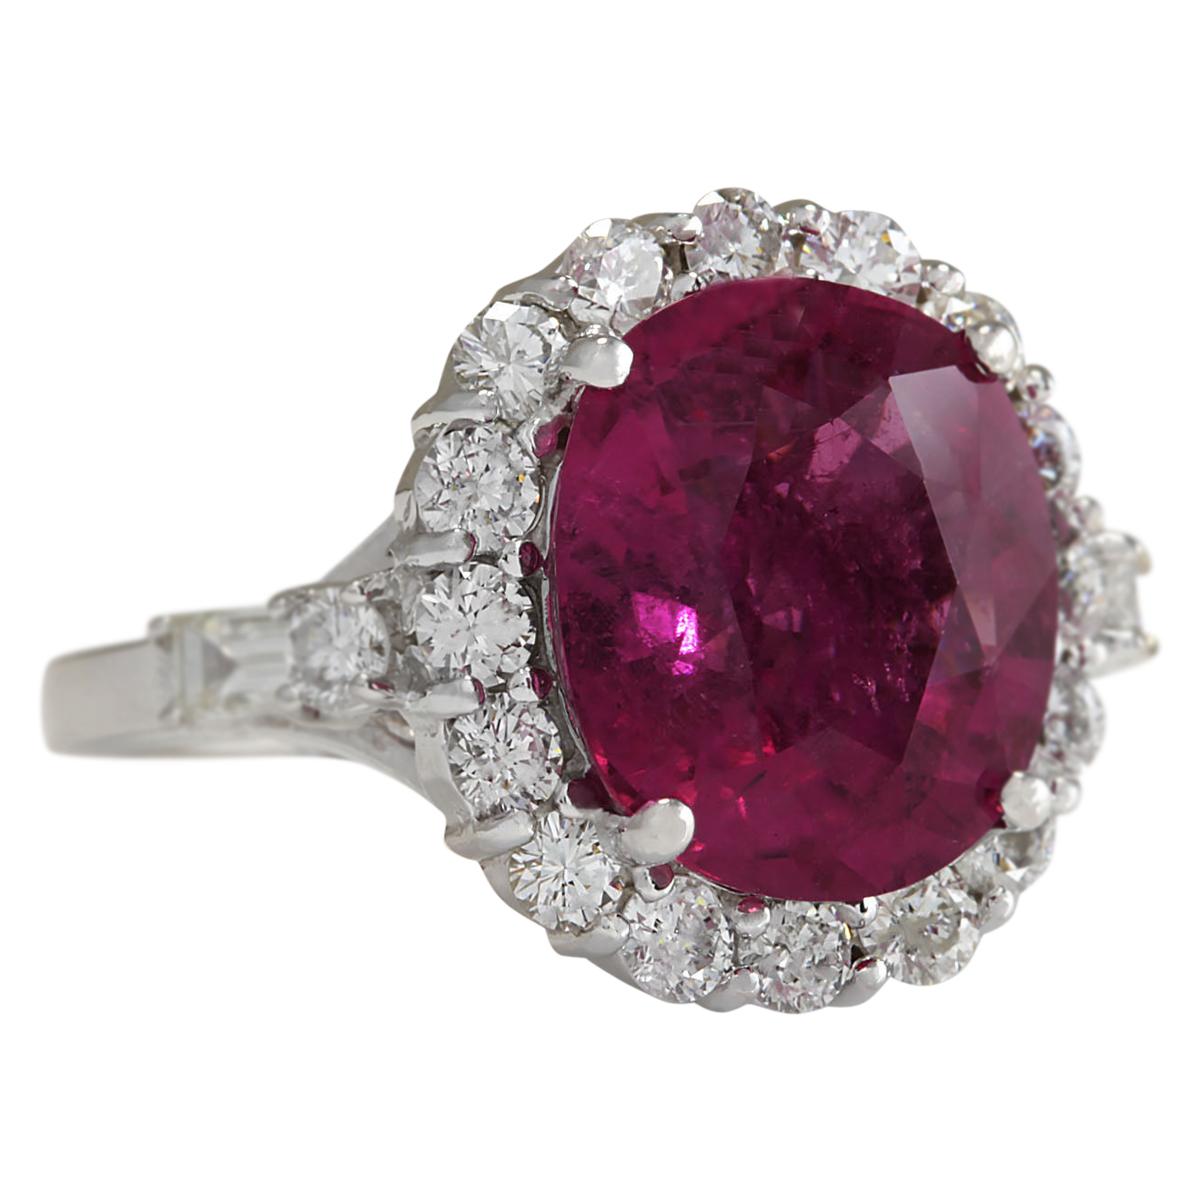 Stamped: 18K White Gold
Total Ring Weight: 8.2 Grams
Ring Length: N/A
Ring Width: N/A
Gemstone Weight: Total Natural Rubelite Weight is 5.76 Carat (Measures: 12.70x11.04 mm)
Color: Red
Diamond Weight: Total Natural Diamond Weight is 1.16